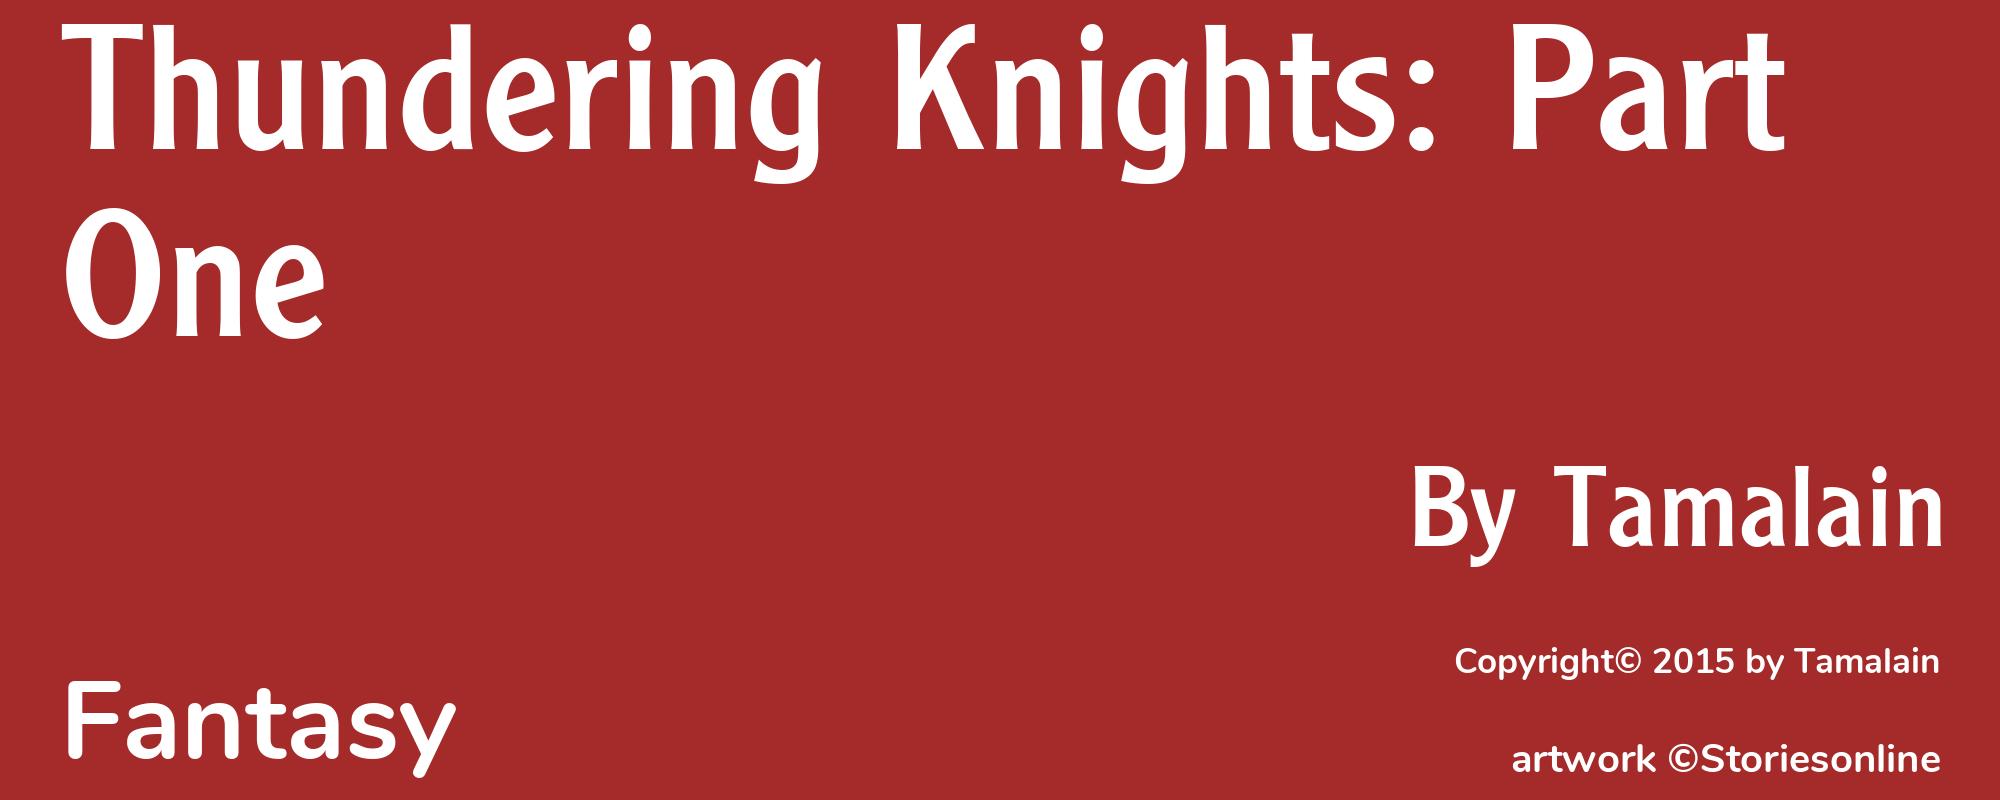 Thundering Knights: Part One - Cover